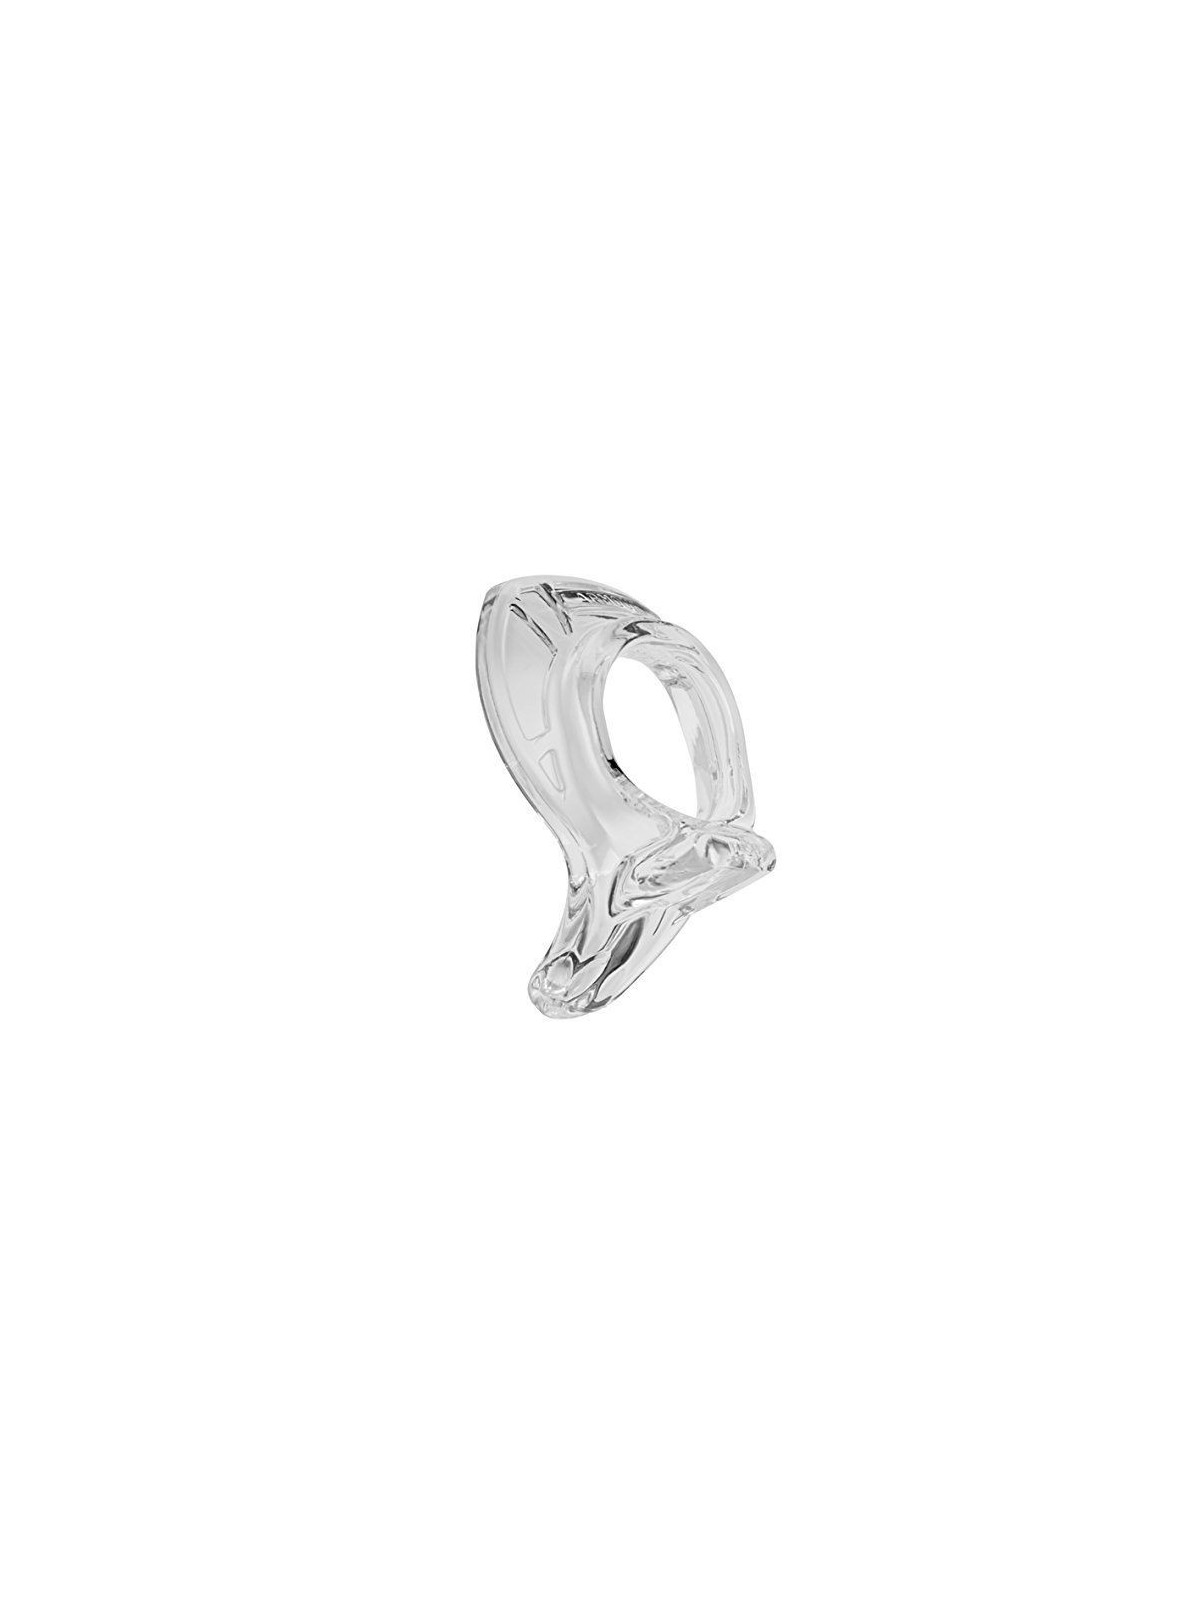 Perfect Fit Armour Up - Comprar Anillo silicona pene Perfectfitbrand - Anillos de silicona pene (1)